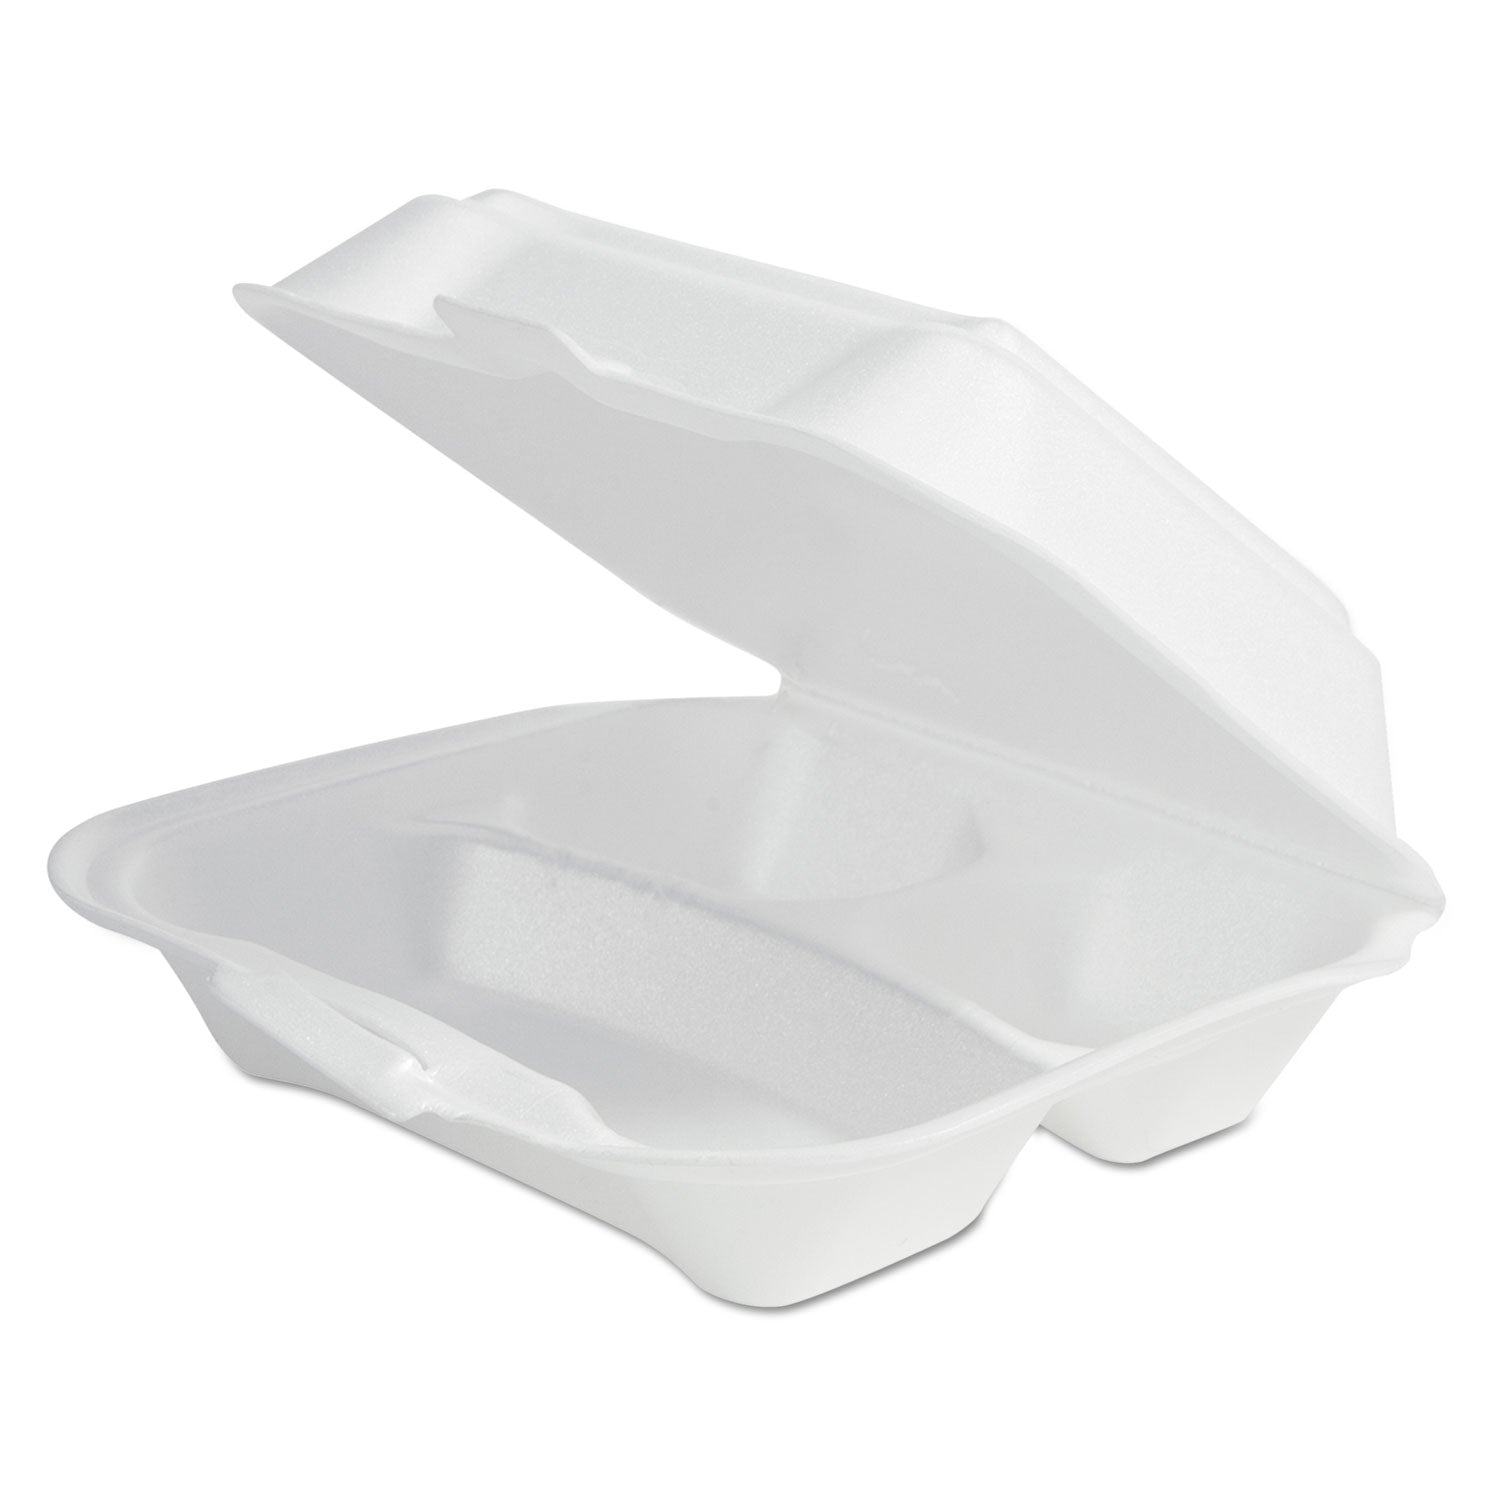 foam-hinged-lid-container-secure-one-tab-latch-3-compartment-781-x-875-x-338-white-100-sleeve-2-sleeves-bag-1-bag-pk_pst12039 - 1